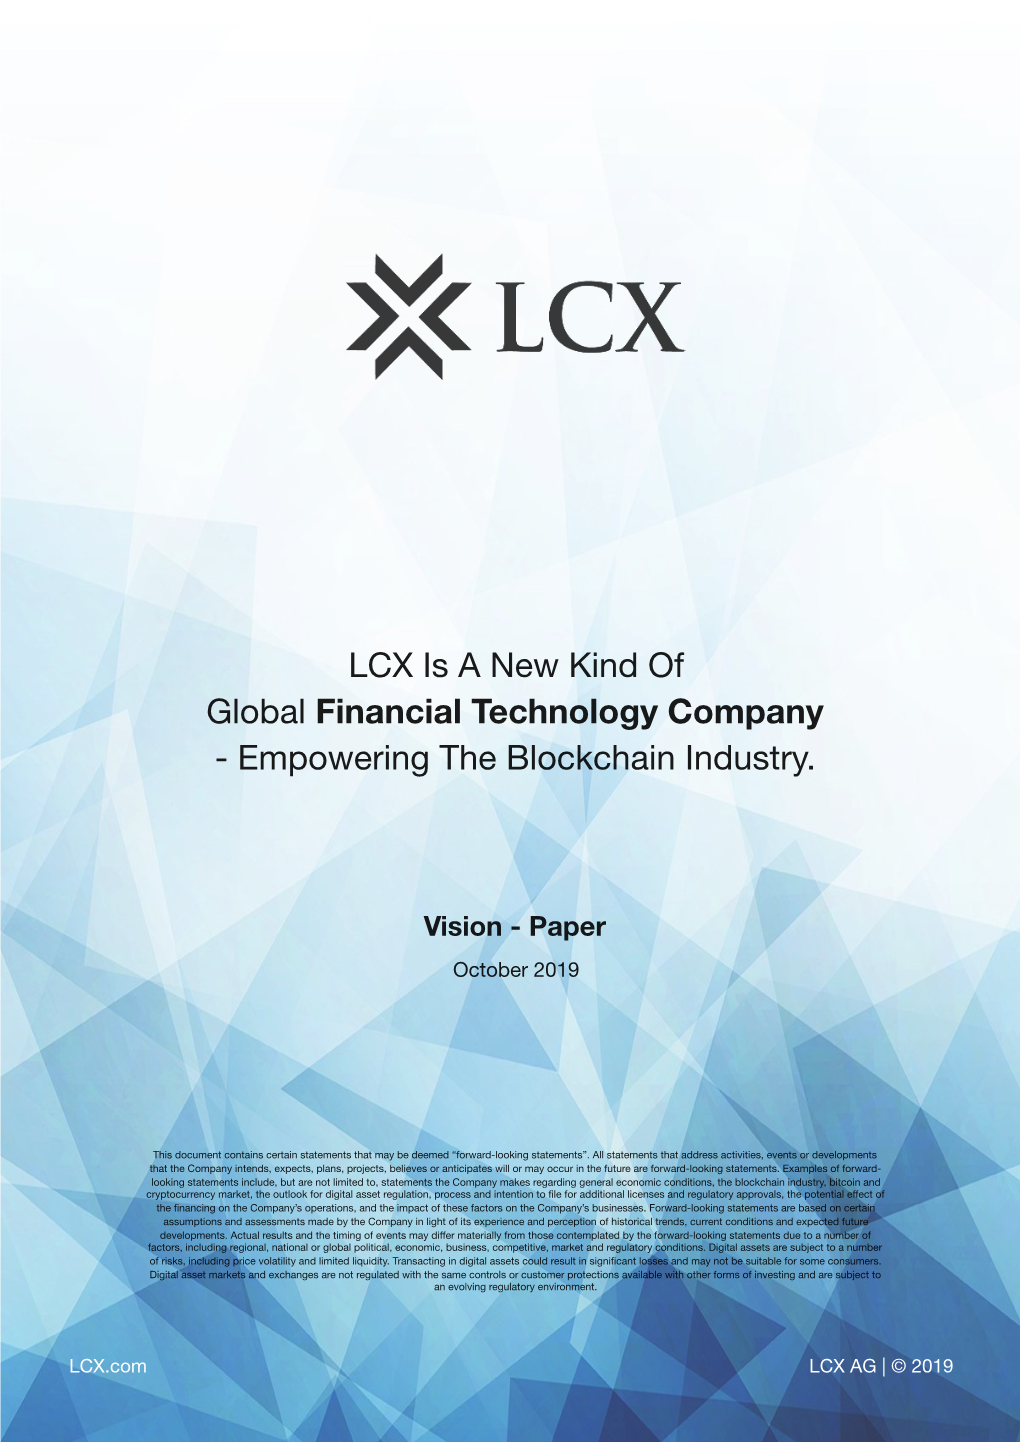 LCX Is a New Kind of Global Financial Technology Company - Empowering the Blockchain Industry